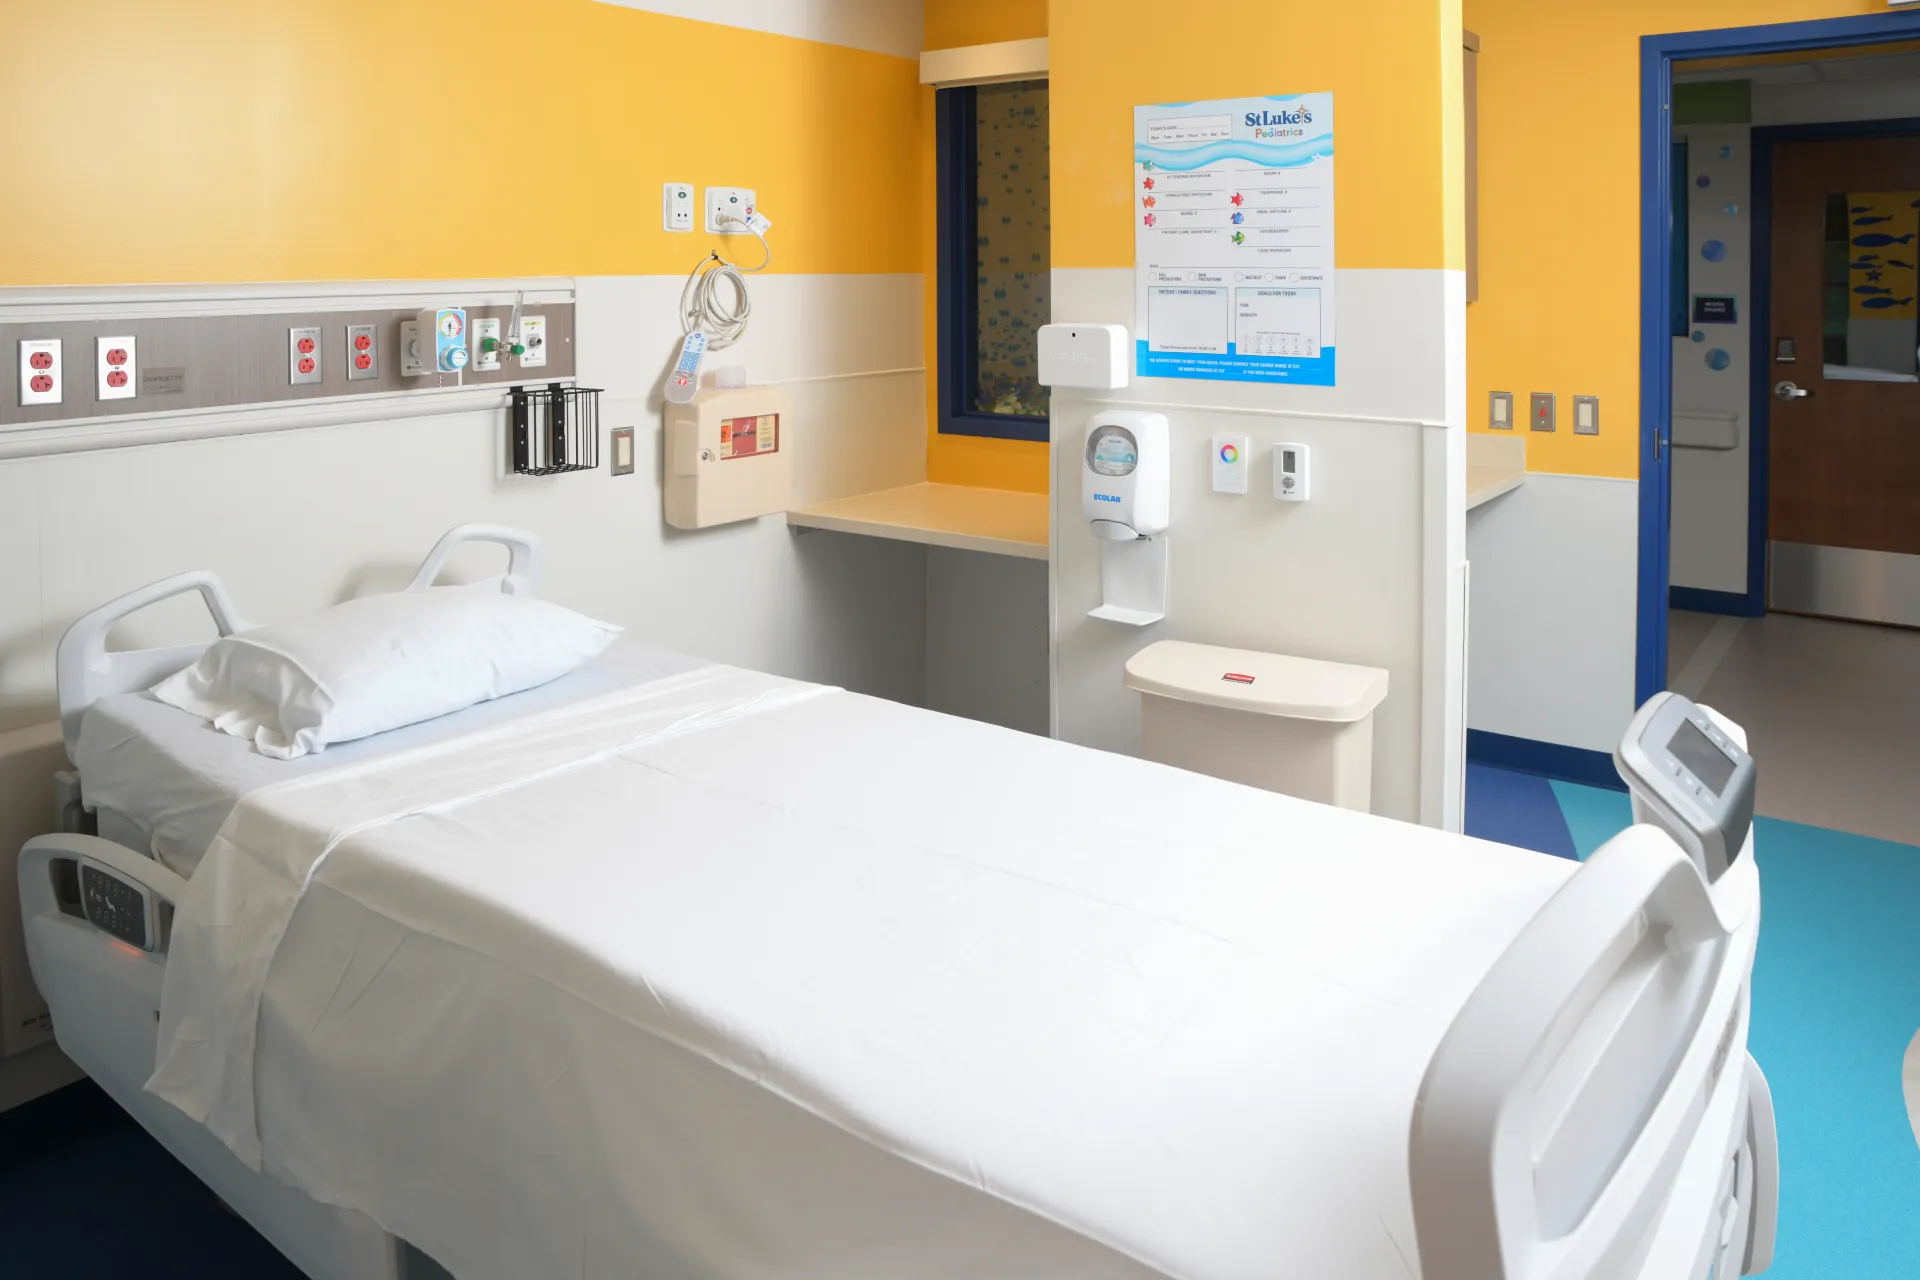 Colorful hospital room with yellow walls and a child sized hospital bed